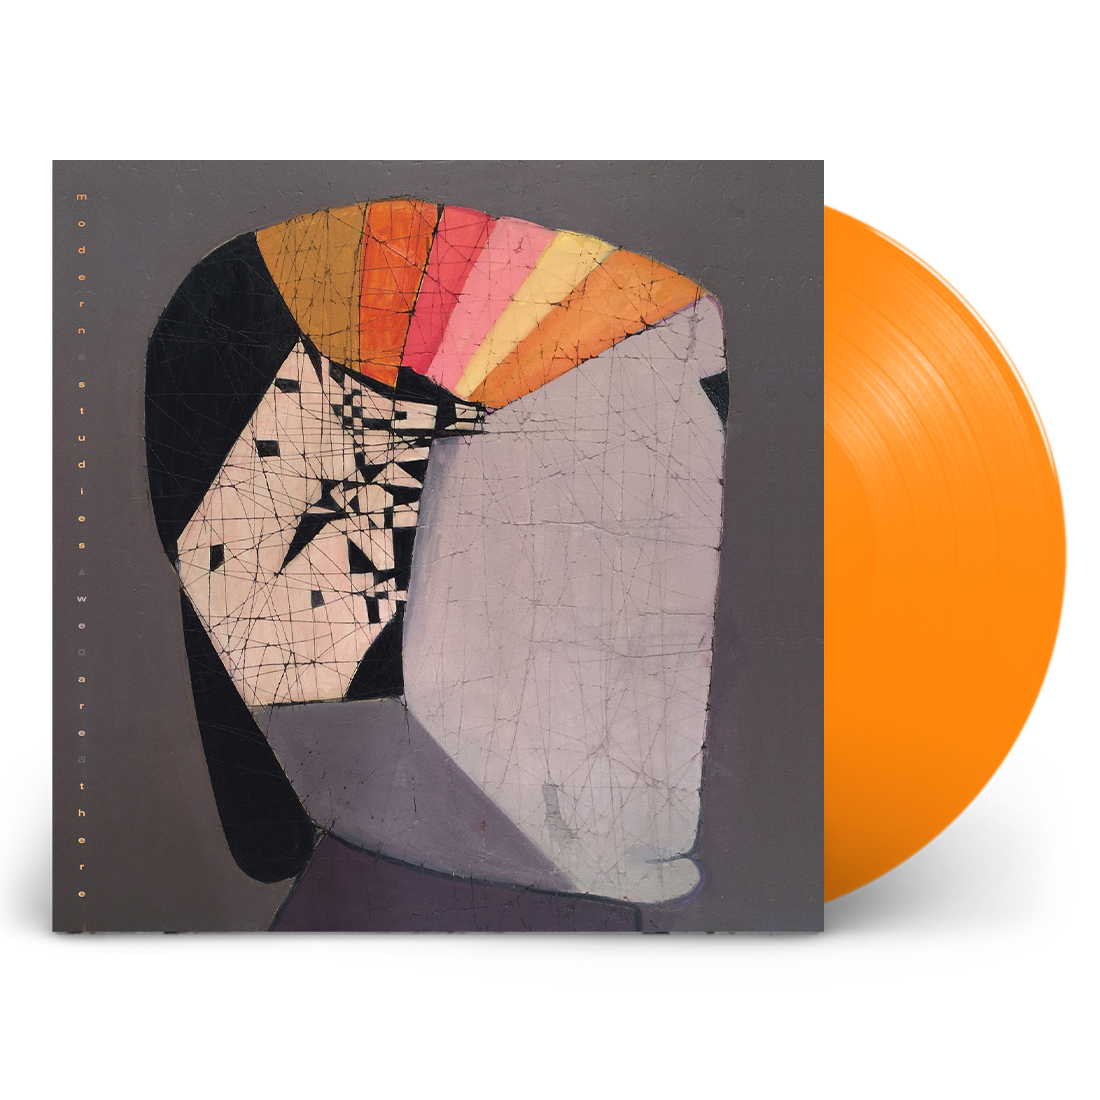 Modern Studies - We Are There: Limited Edition Orange Vinyl LP